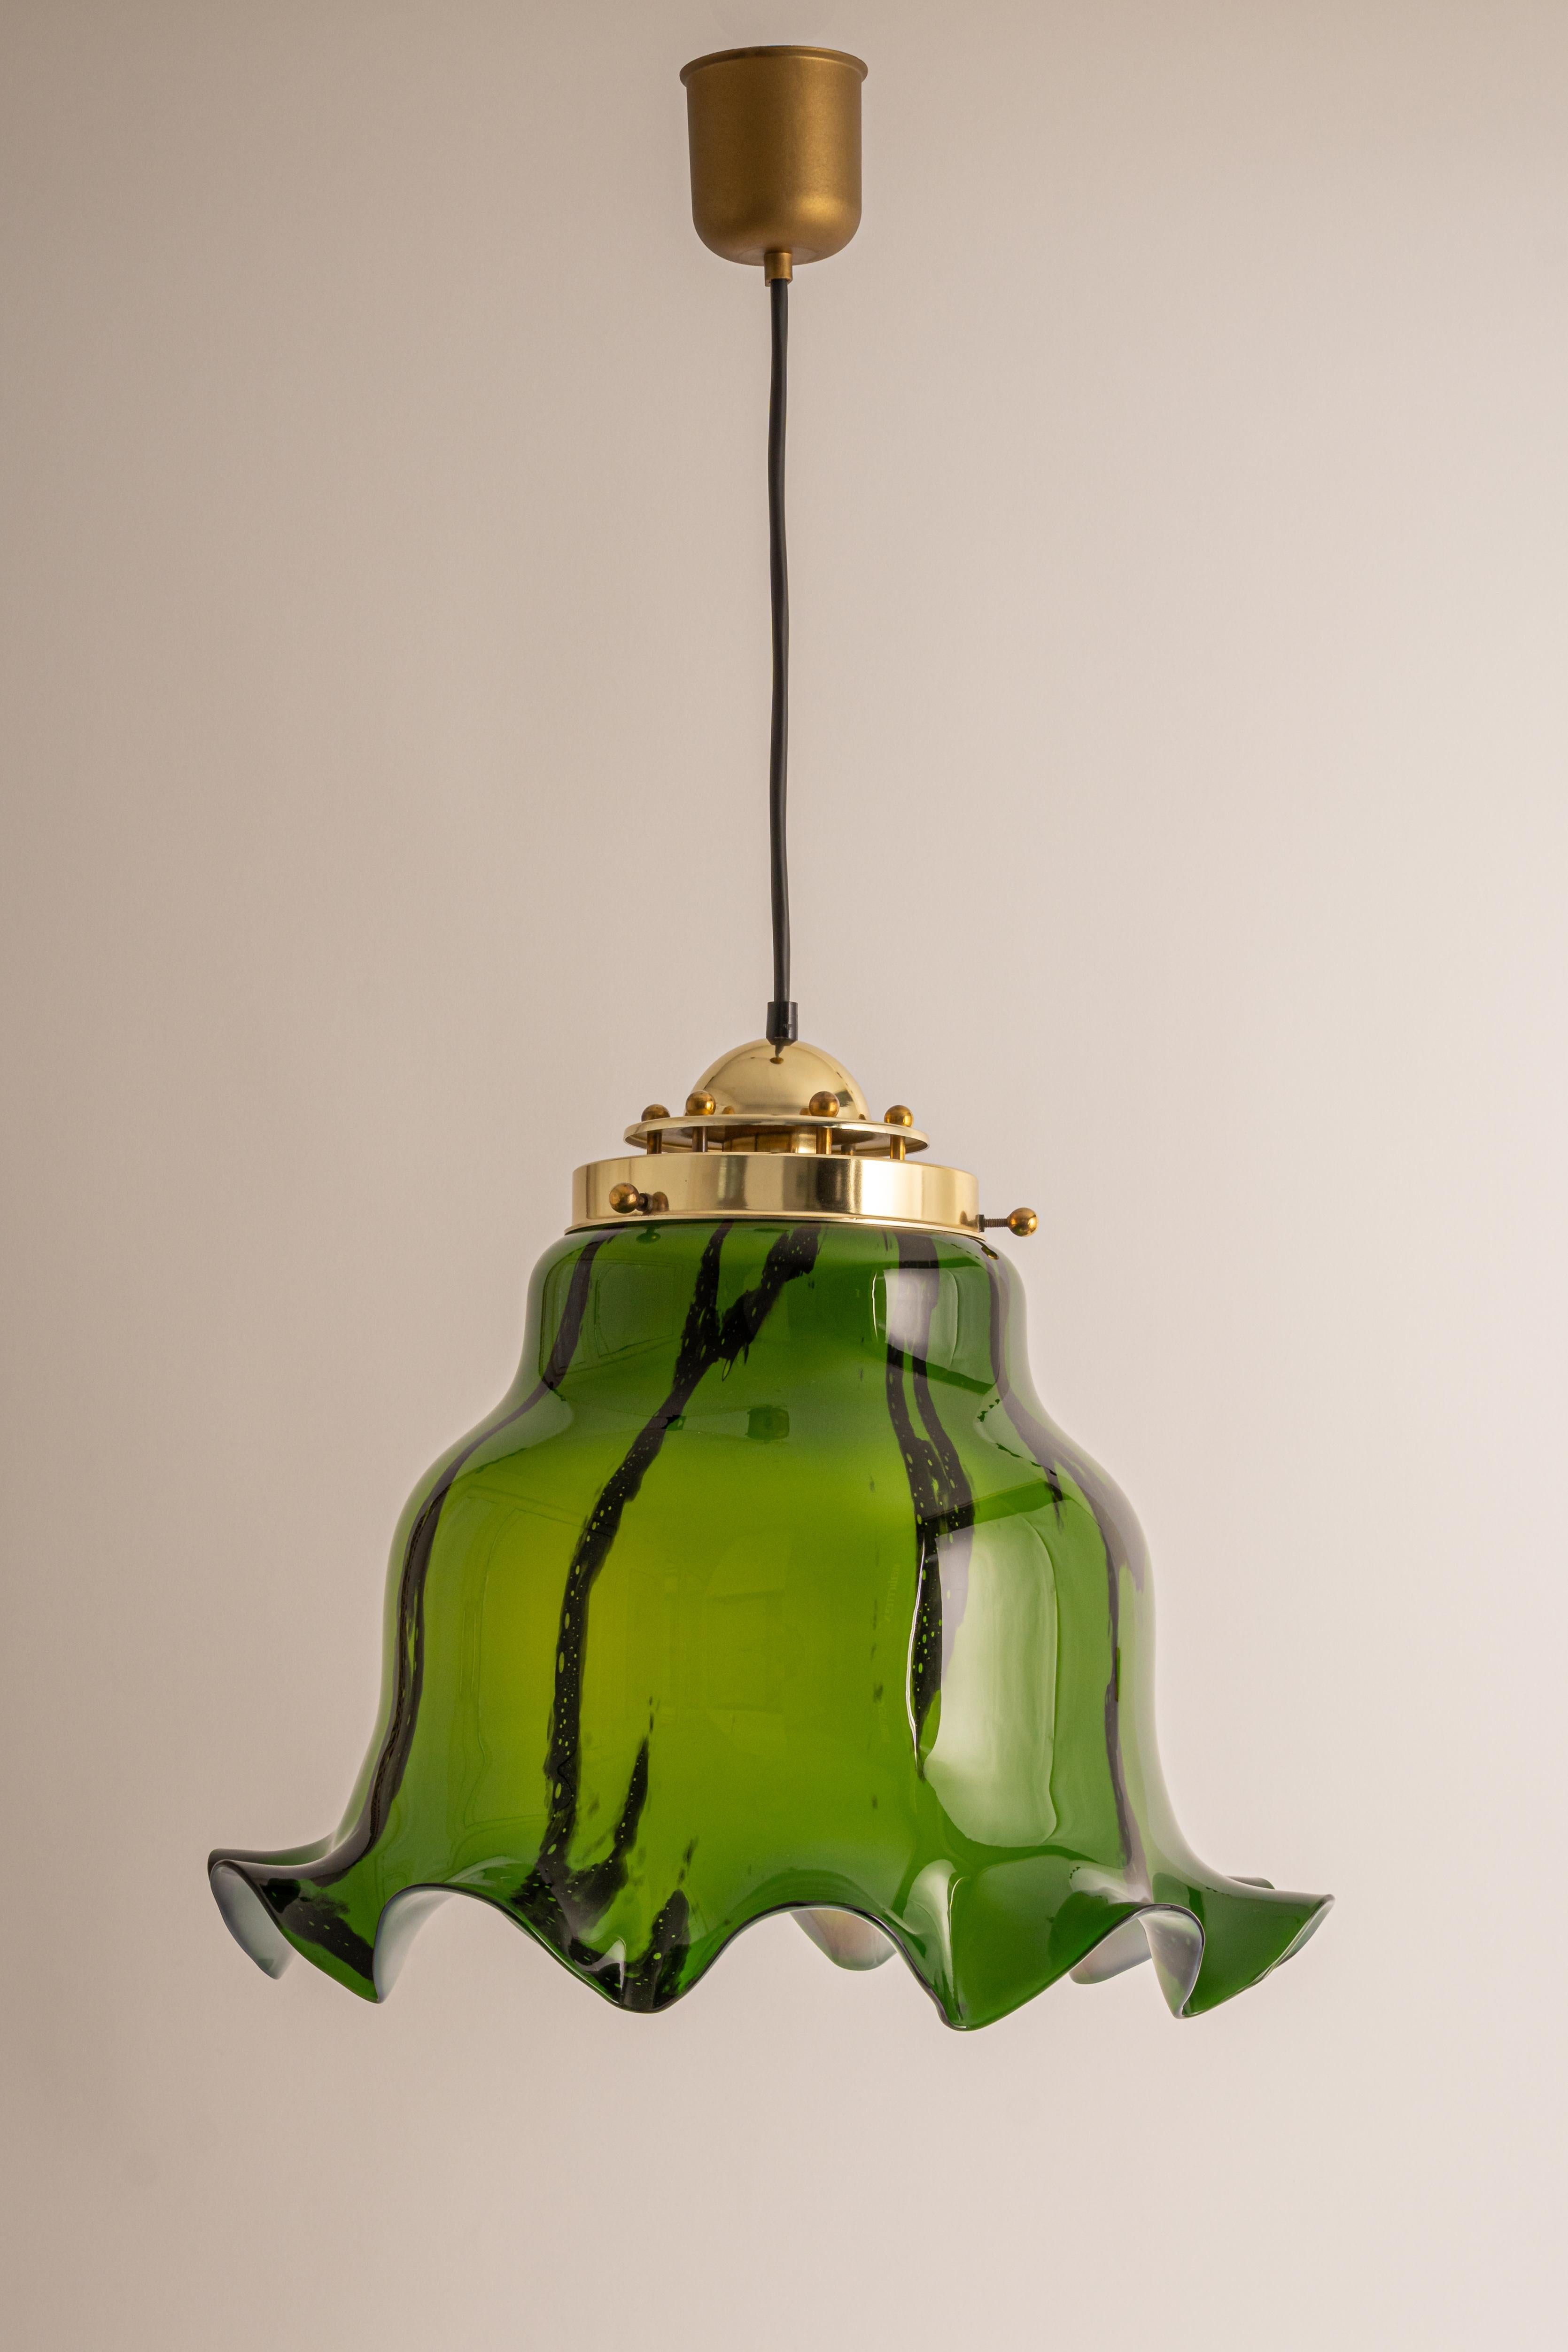 Grenn glass pendant light by Peill & Putzler, manufactured in Germany, circa the 1970s.

High quality and in very good condition. Cleaned, well-wired and ready to use. 
The fixture requires 1x E27 Standard bulbs with 100W max
Light bulbs are not